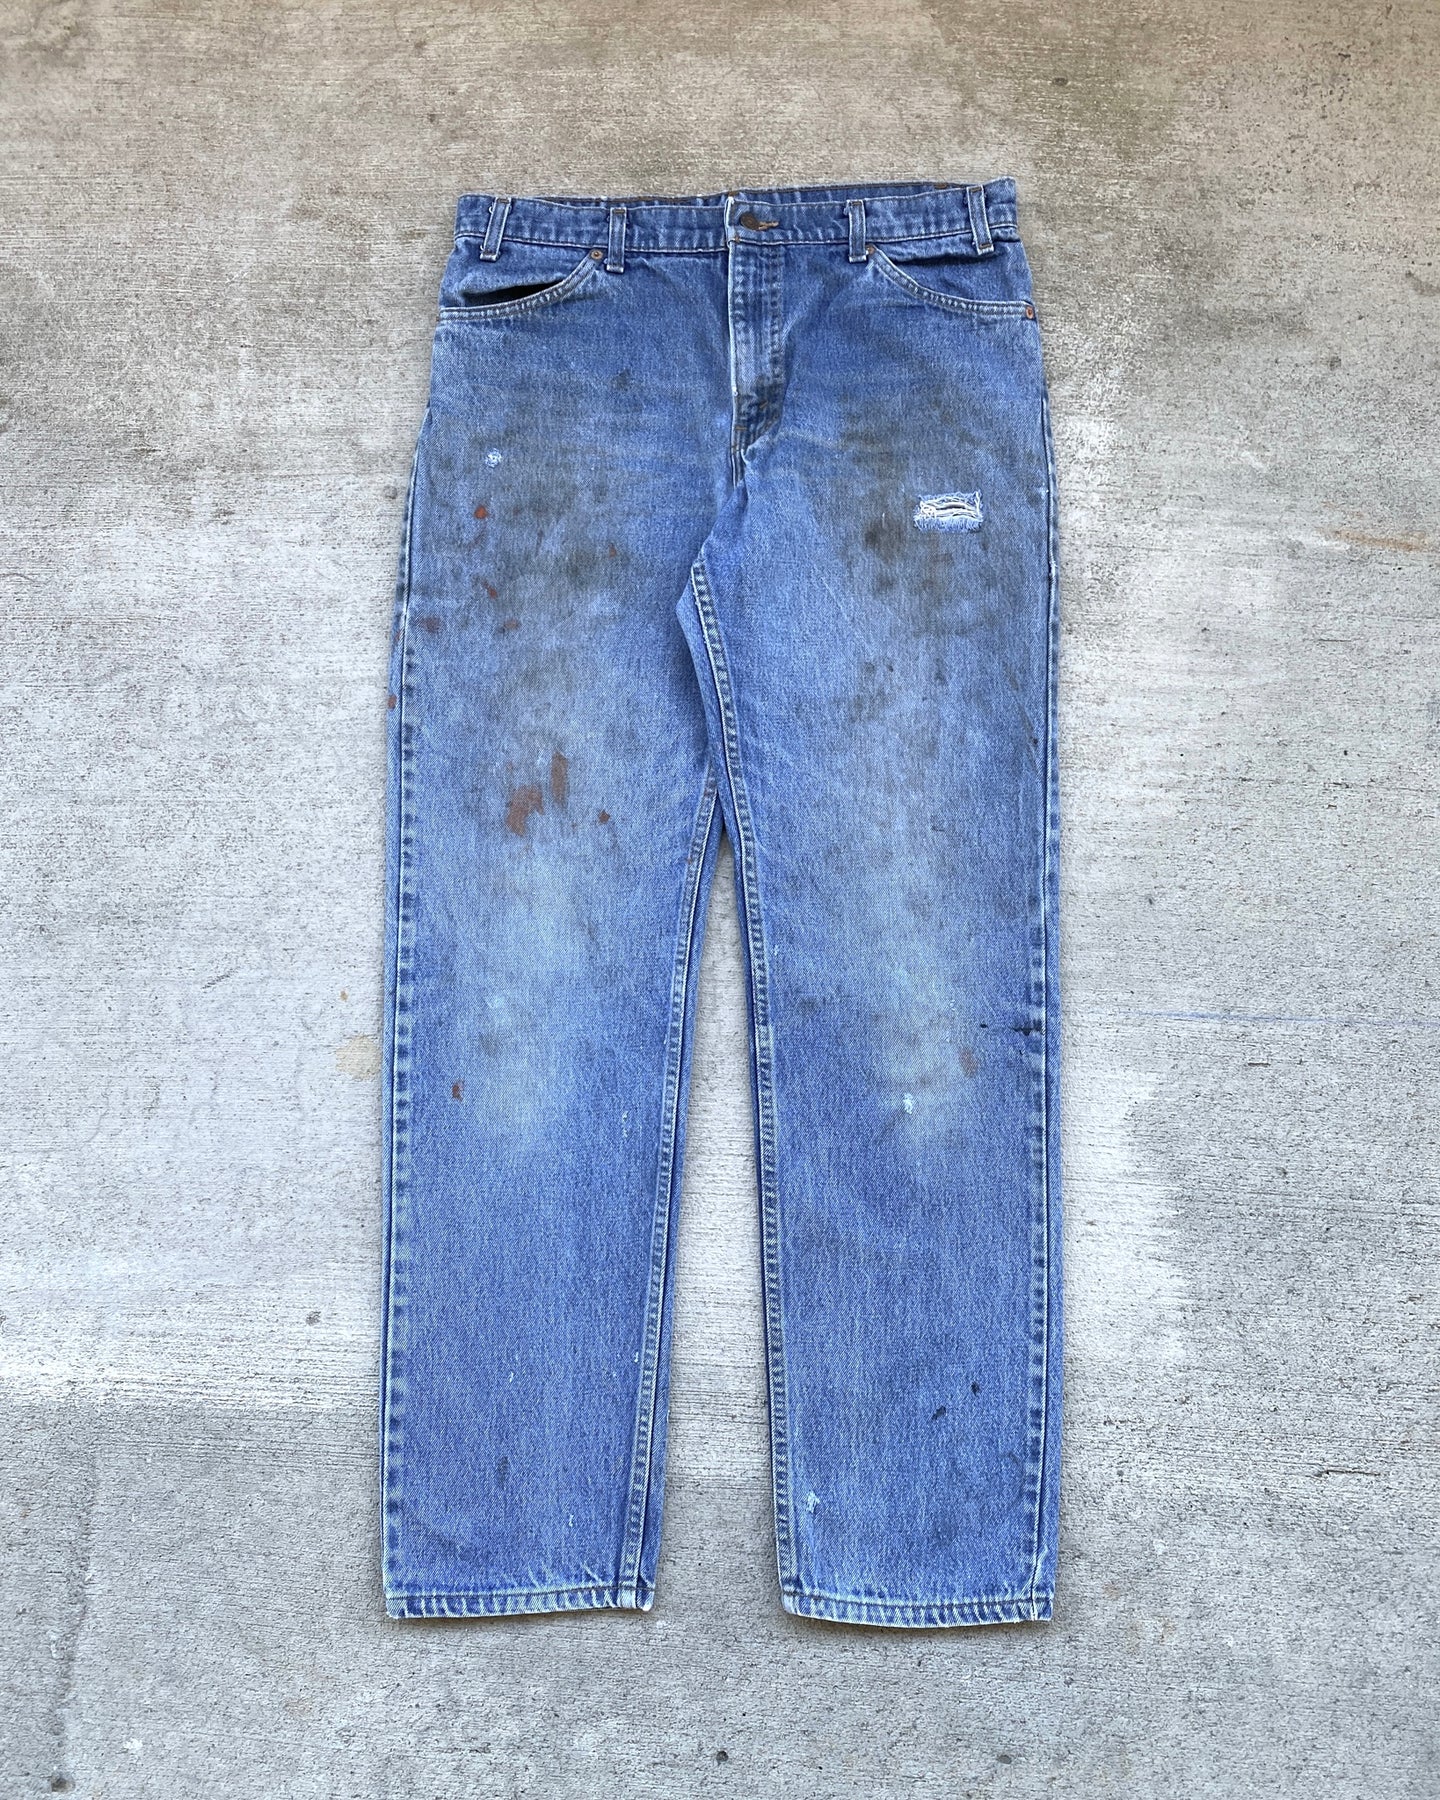 1990s Levi's Stained and Distressed Orange Tab 506 - Size 35 x 32